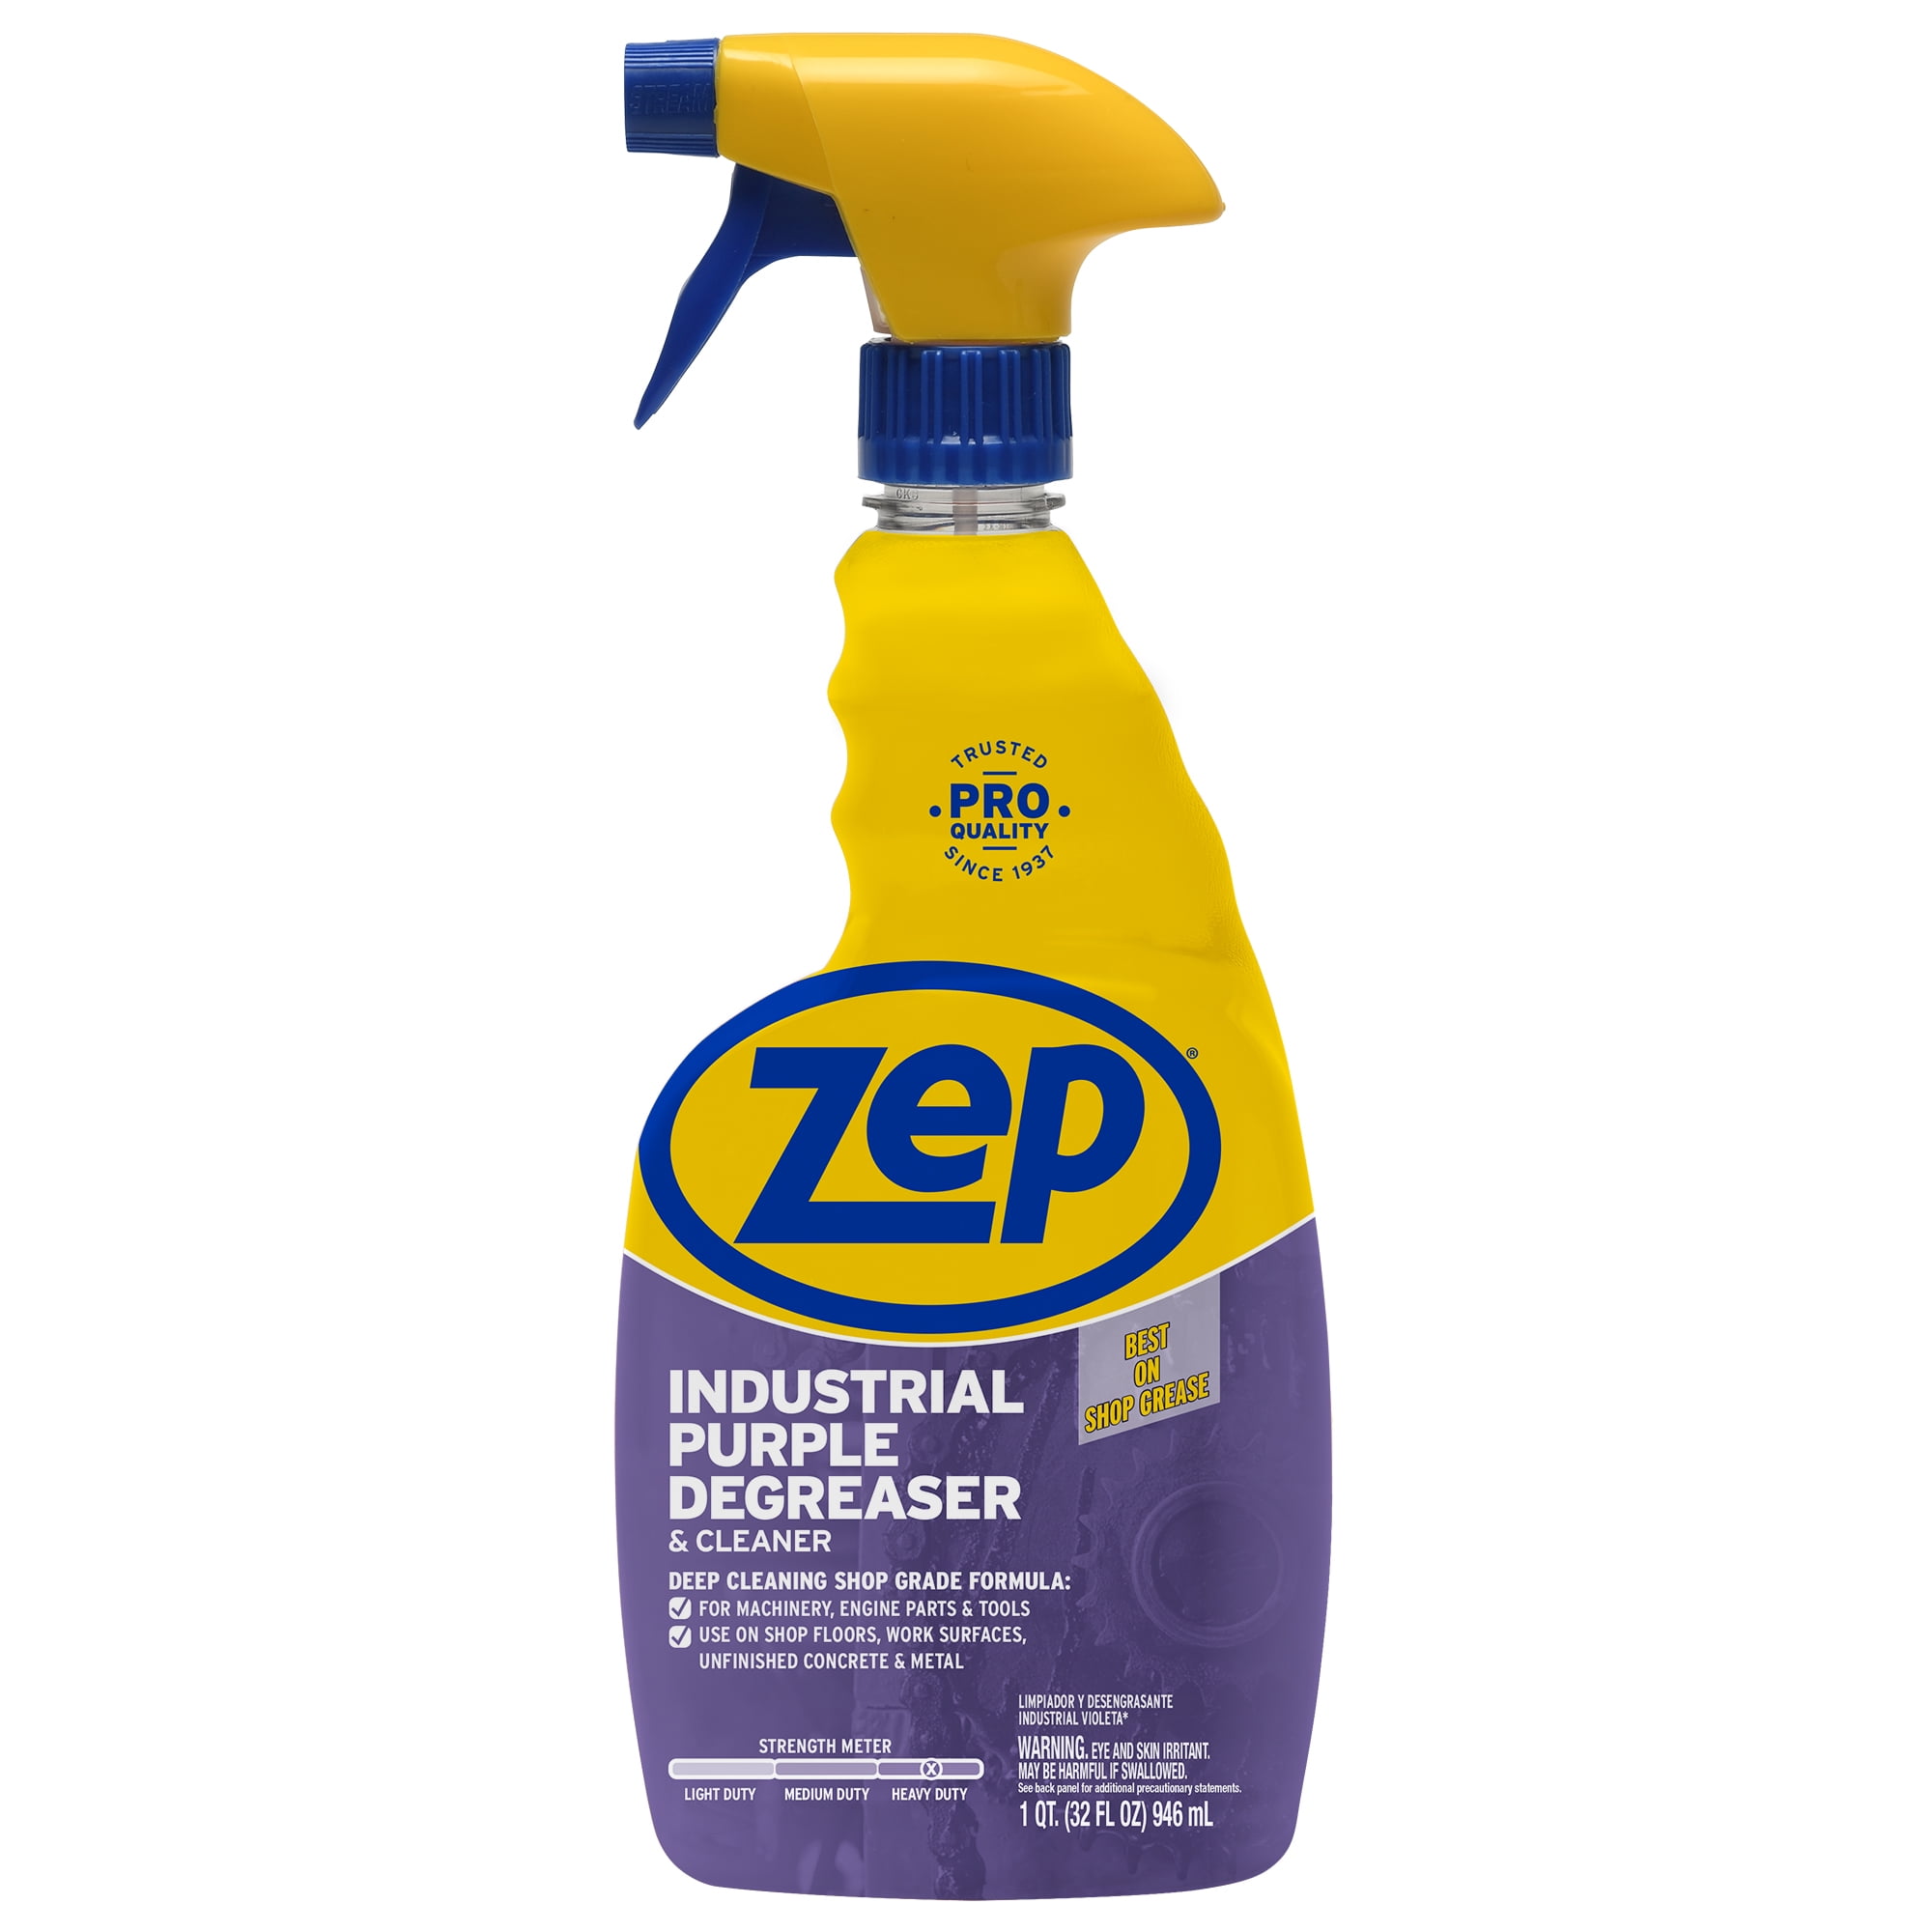  Zep Morado Concentrated Super Cleaner 4 Gallon 85624(Pack of 4)  Industrial Degreaser-This Product is for Business Customers Only :  Industrial & Scientific